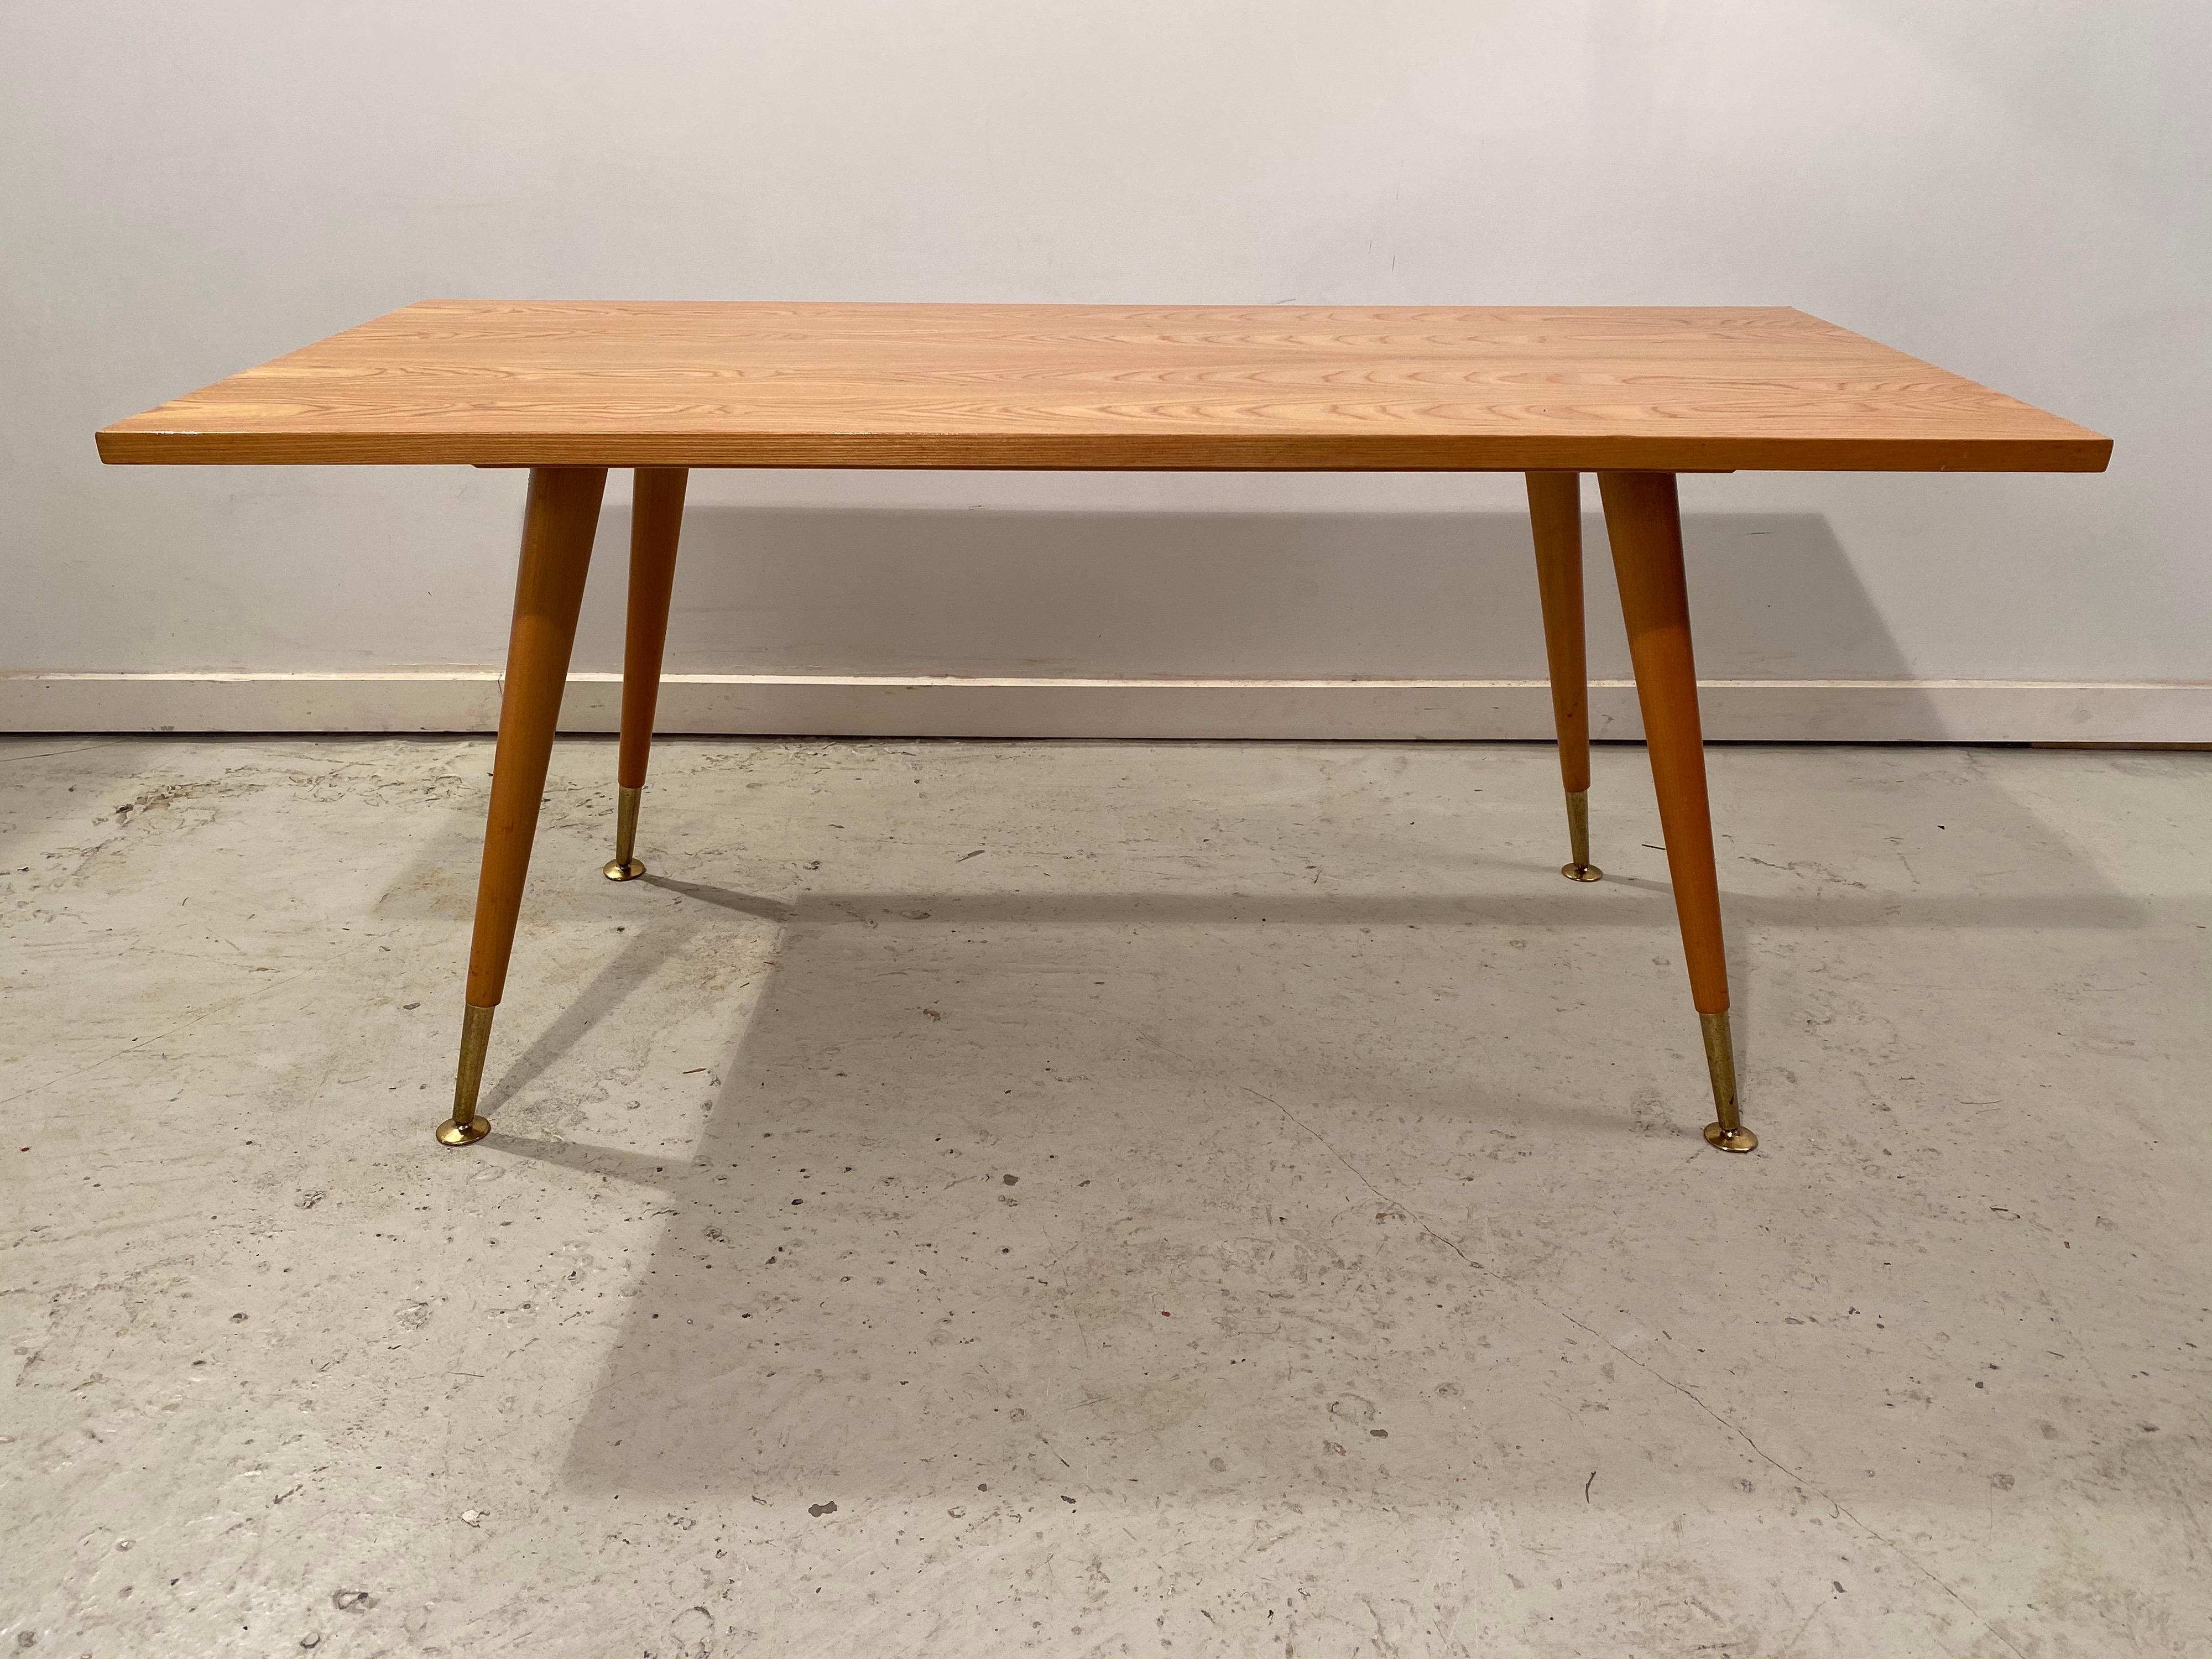 Scandinavian Modern Beautiful Clean Maple Coffee or Side Table by Ilse Möbel, Germany, circa 1950 For Sale